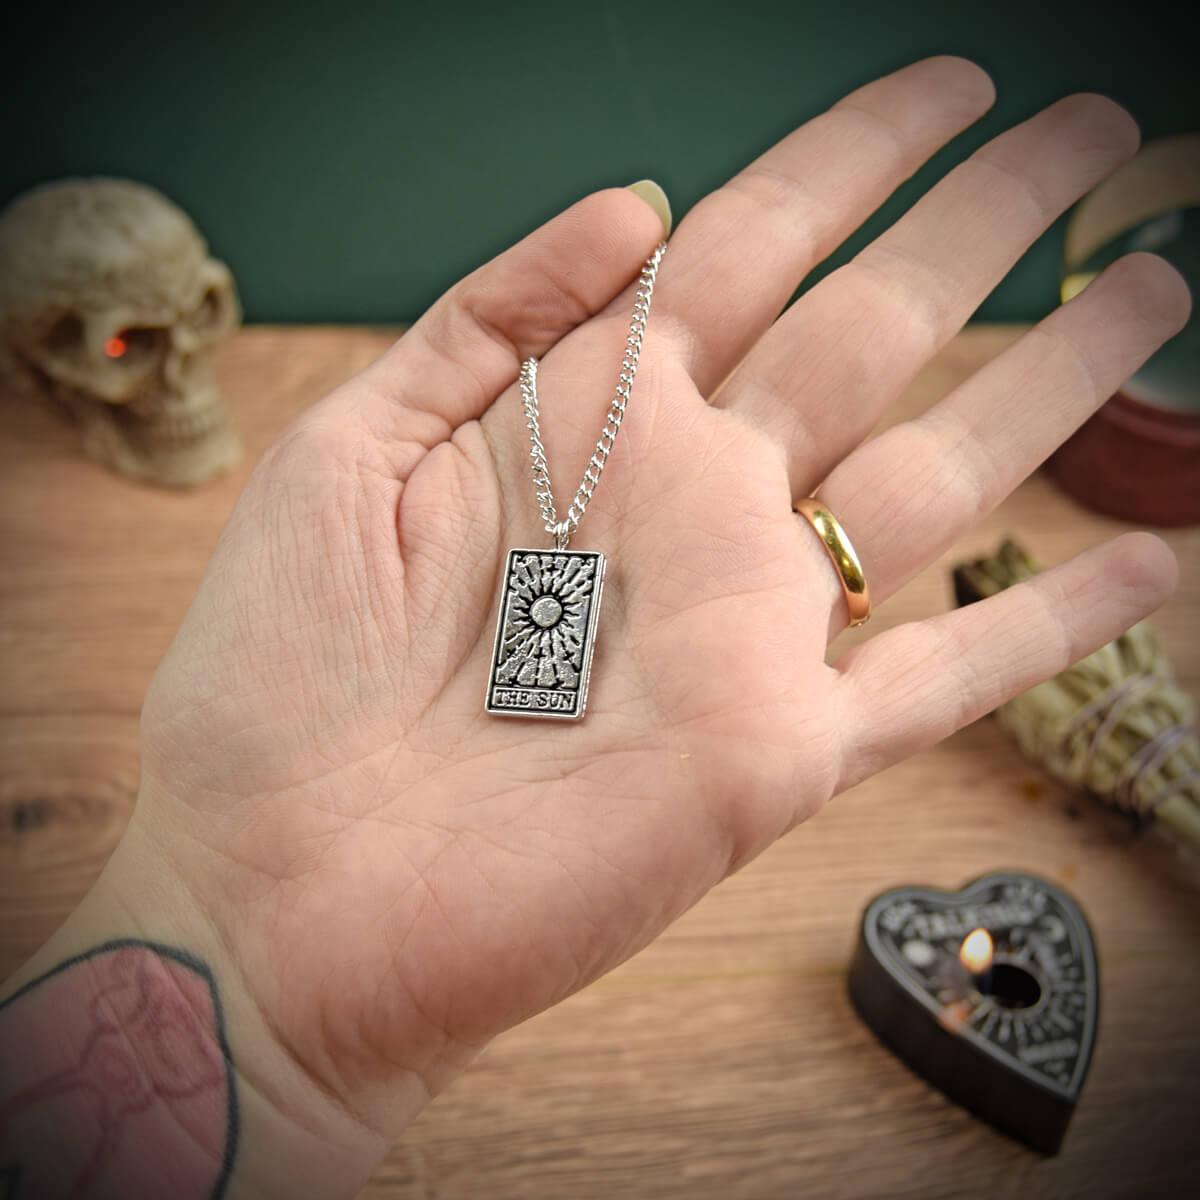 The Sun Tarot Card Necklace | Occult Patches & Pins